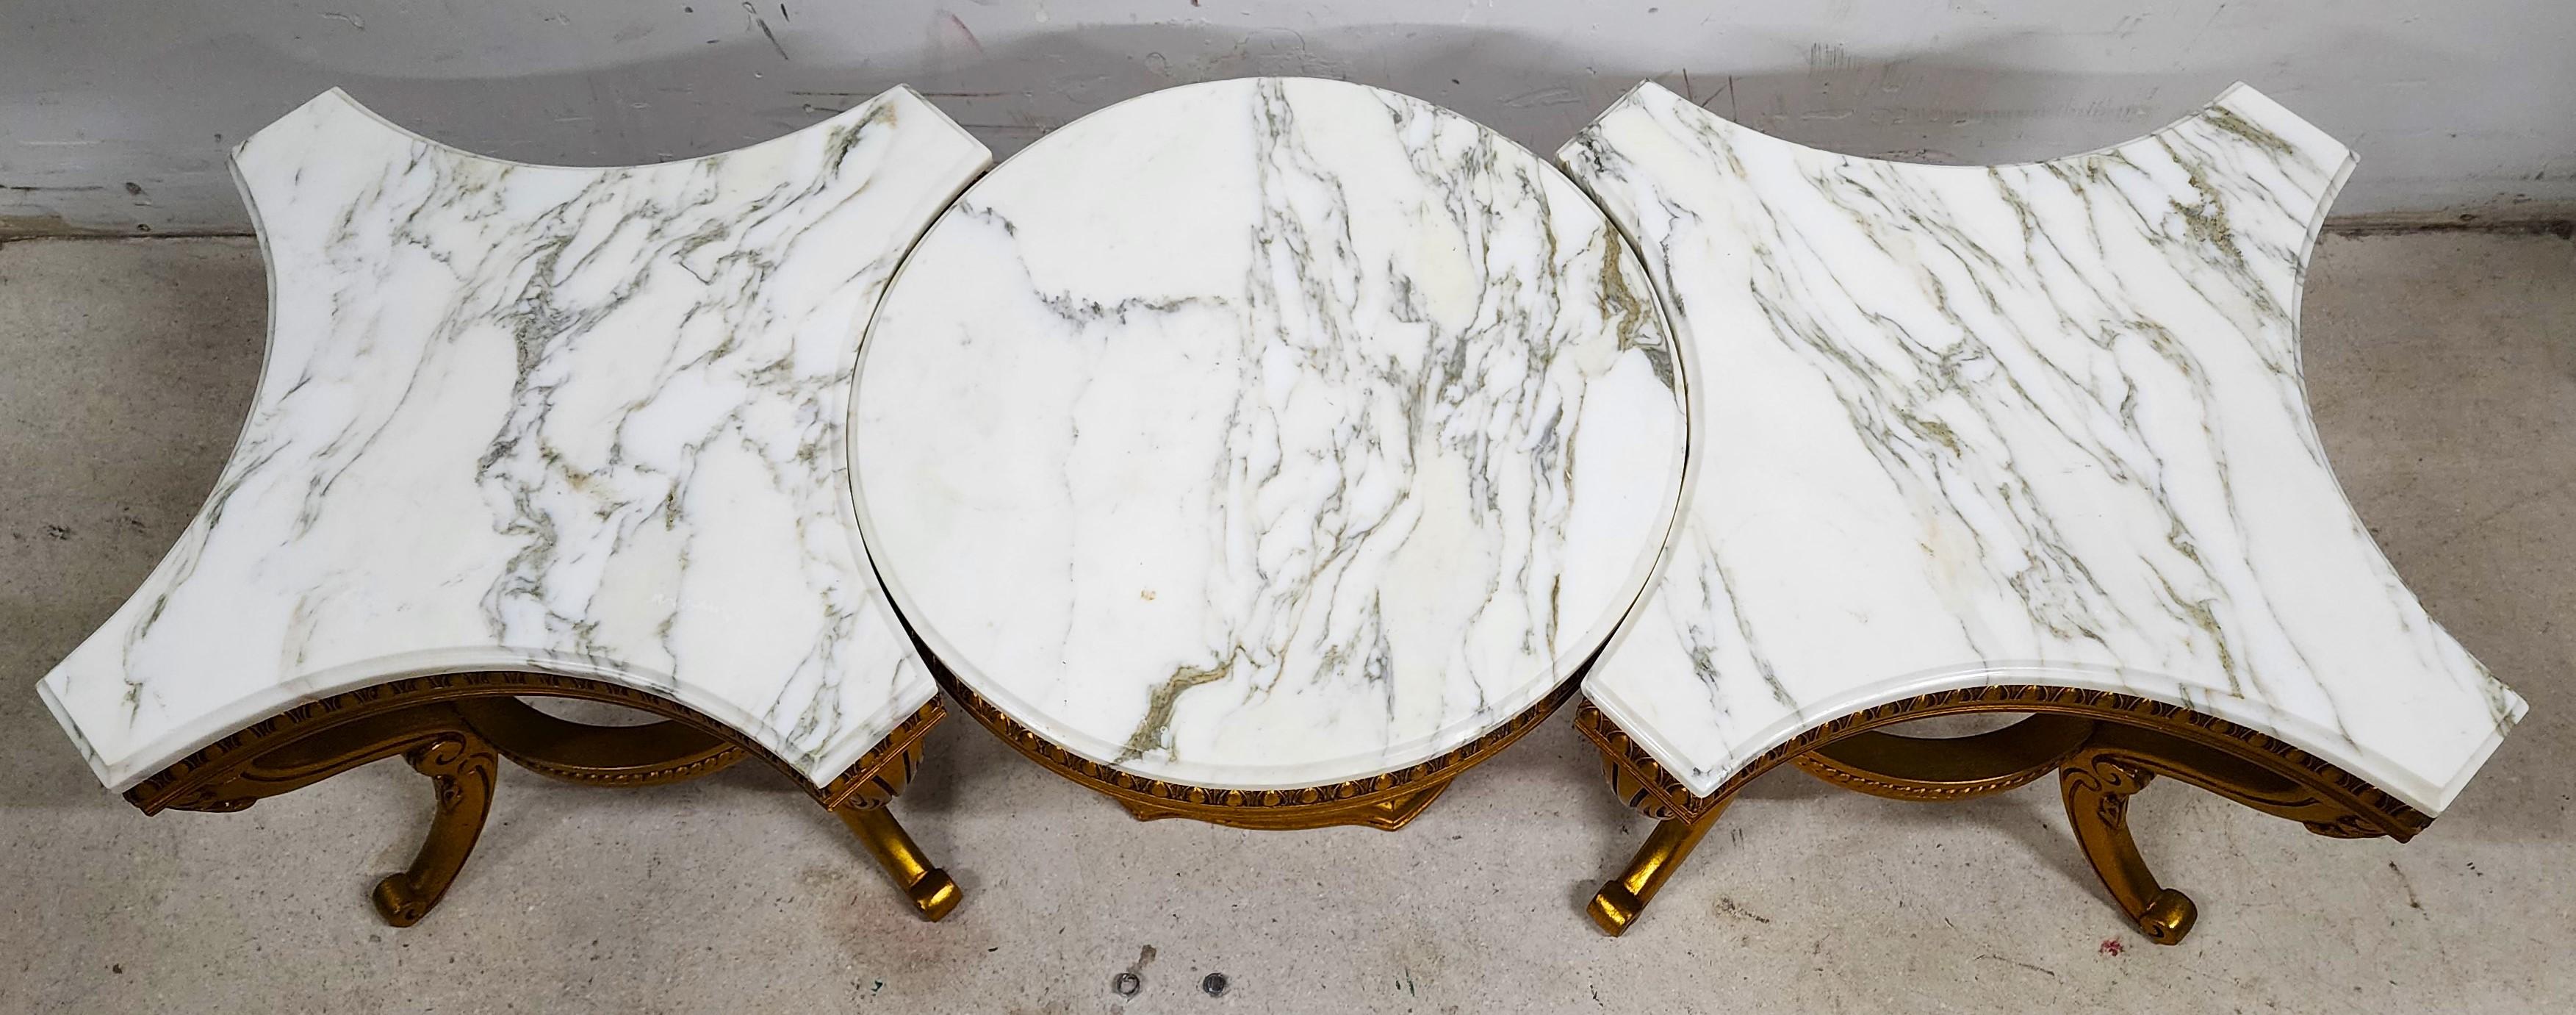 20th Century Louis VX Coffee Side Tables Marble Gilt Gold Leaf 3 Piece